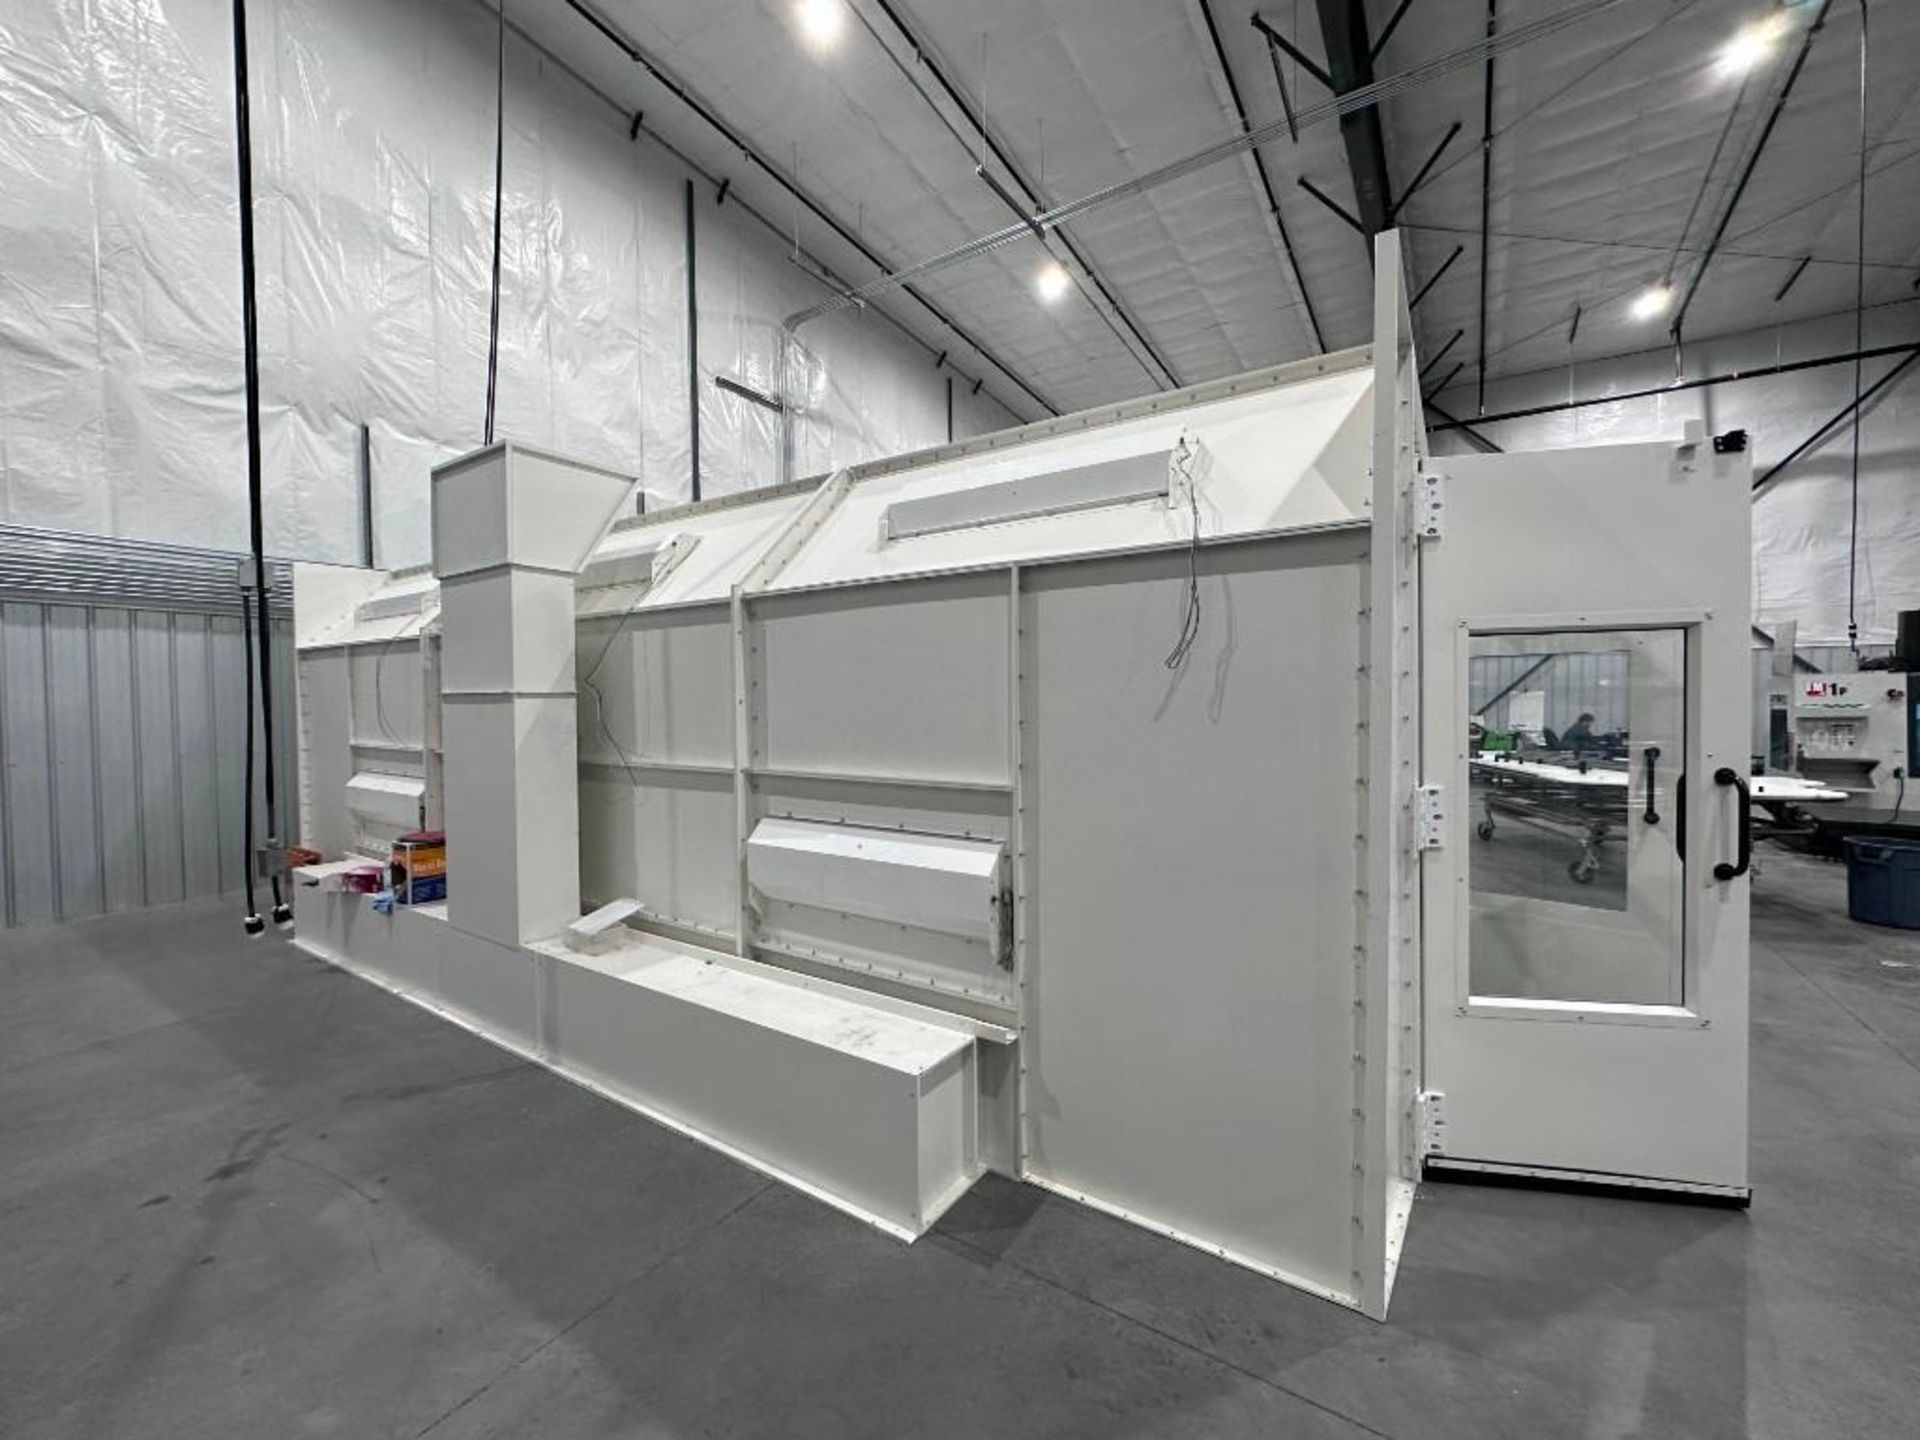 IDEAL PSB-SDD26B-AK PAINT BOOTH W/SIDE DOWN DRAFT - 26' - Image 5 of 20